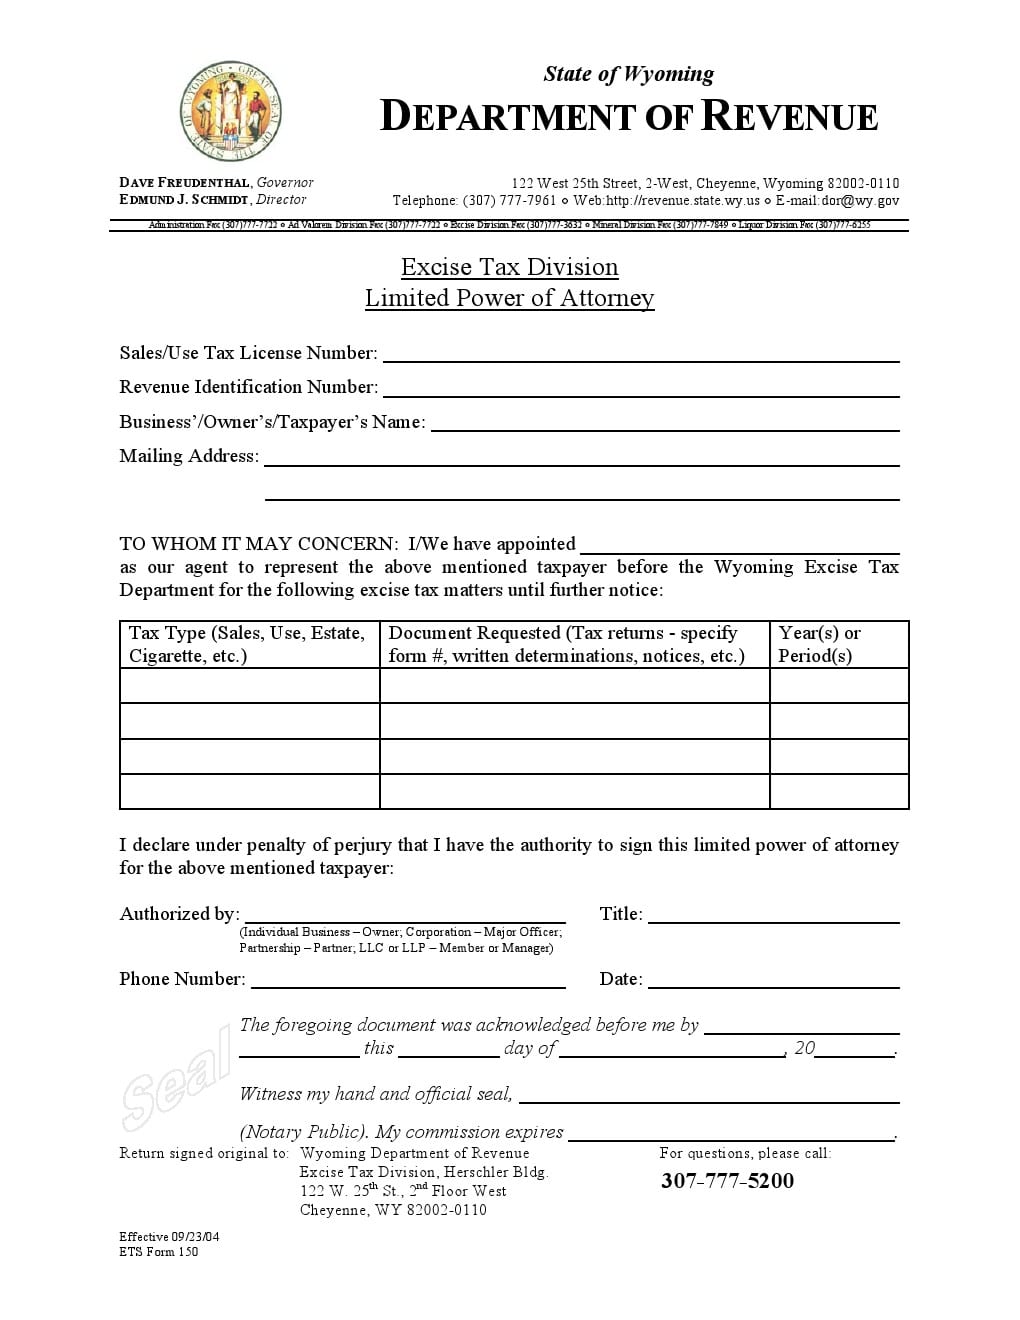 Wyoming Limited Power of Attorney Form for Excise Tax